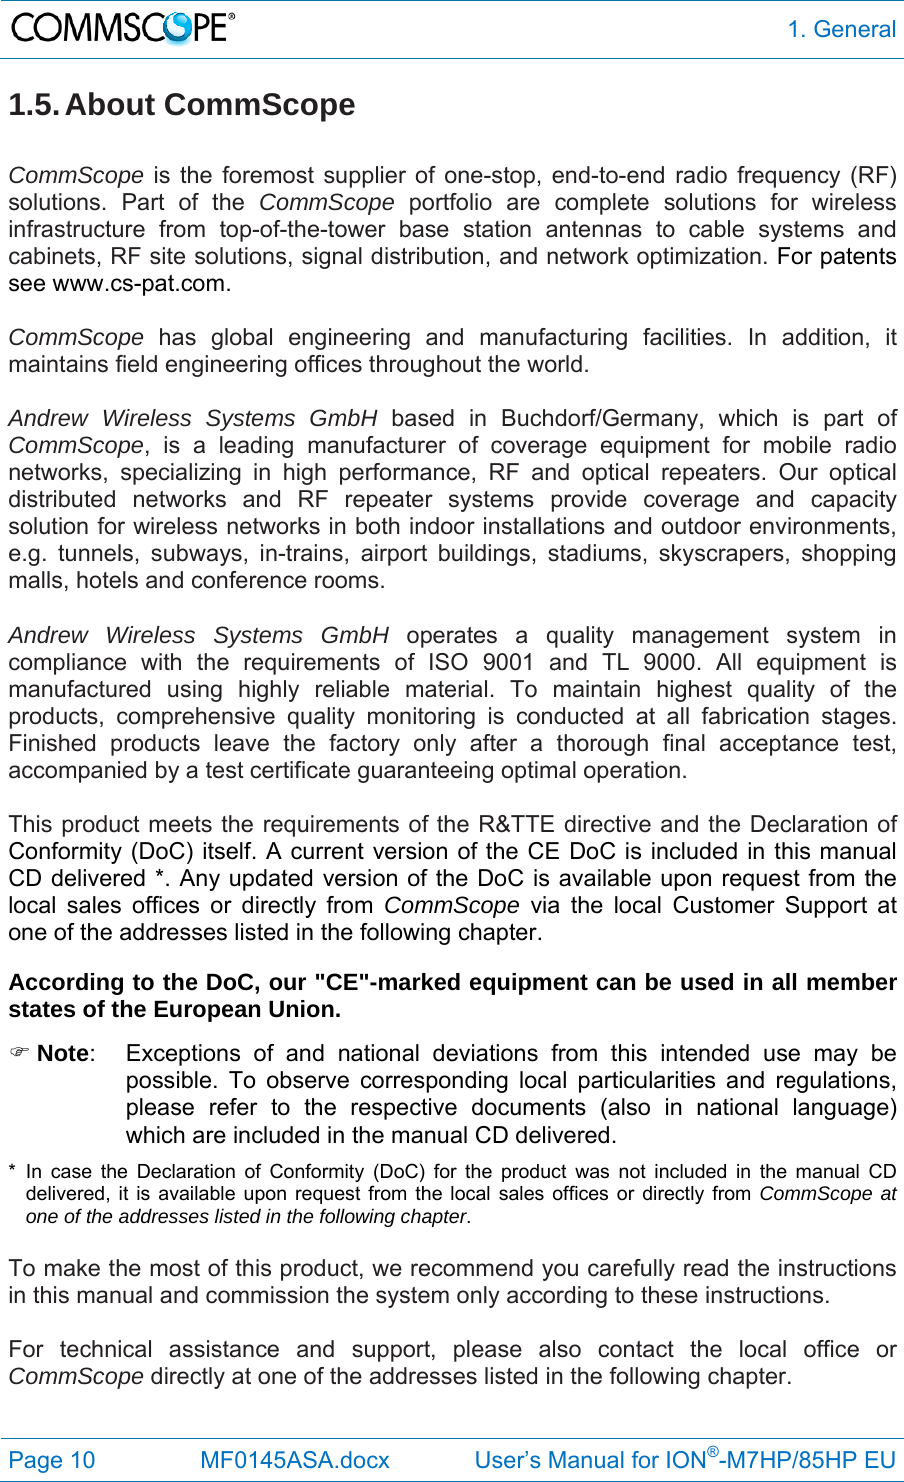  1. General Page 10  MF0145ASA.docx             User’s Manual for ION®-M7HP/85HP EU 1.5. About  CommScope  CommScope is the foremost supplier of one-stop, end-to-end radio frequency (RF) solutions. Part of the CommScope portfolio are complete solutions for wireless infrastructure from top-of-the-tower base station antennas to cable systems and cabinets, RF site solutions, signal distribution, and network optimization. For patents see www.cs-pat.com.  CommScope  has global engineering and manufacturing facilities. In addition, it maintains field engineering offices throughout the world.  Andrew Wireless Systems GmbH based in Buchdorf/Germany, which is part of CommScope, is a leading manufacturer of coverage equipment for mobile radio networks, specializing in high performance, RF and optical repeaters. Our optical distributed networks and RF repeater systems provide coverage and capacity solution for wireless networks in both indoor installations and outdoor environments, e.g. tunnels, subways, in-trains, airport buildings, stadiums, skyscrapers, shopping malls, hotels and conference rooms.   Andrew Wireless Systems GmbH operates a quality management system in compliance with the requirements of ISO 9001 and TL 9000. All equipment is manufactured using highly reliable material. To maintain highest quality of the products, comprehensive quality monitoring is conducted at all fabrication stages. Finished products leave the factory only after a thorough final acceptance test, accompanied by a test certificate guaranteeing optimal operation.  This product meets the requirements of the R&amp;TTE directive and the Declaration of Conformity (DoC) itself. A current version of the CE DoC is included in this manual CD delivered *. Any updated version of the DoC is available upon request from the local sales offices or directly from CommScope via the local Customer Support at one of the addresses listed in the following chapter.  According to the DoC, our &quot;CE&quot;-marked equipment can be used in all member states of the European Union.  Note:  Exceptions of and national deviations from this intended use may be possible. To observe corresponding local particularities and regulations, please refer to the respective documents (also in national language) which are included in the manual CD delivered. * In case the Declaration of Conformity (DoC) for the product was not included in the manual CD delivered, it is available upon request from the local sales offices or directly from CommScope at one of the addresses listed in the following chapter.  To make the most of this product, we recommend you carefully read the instructions in this manual and commission the system only according to these instructions.   For technical assistance and support, please also contact the local office or CommScope directly at one of the addresses listed in the following chapter.   